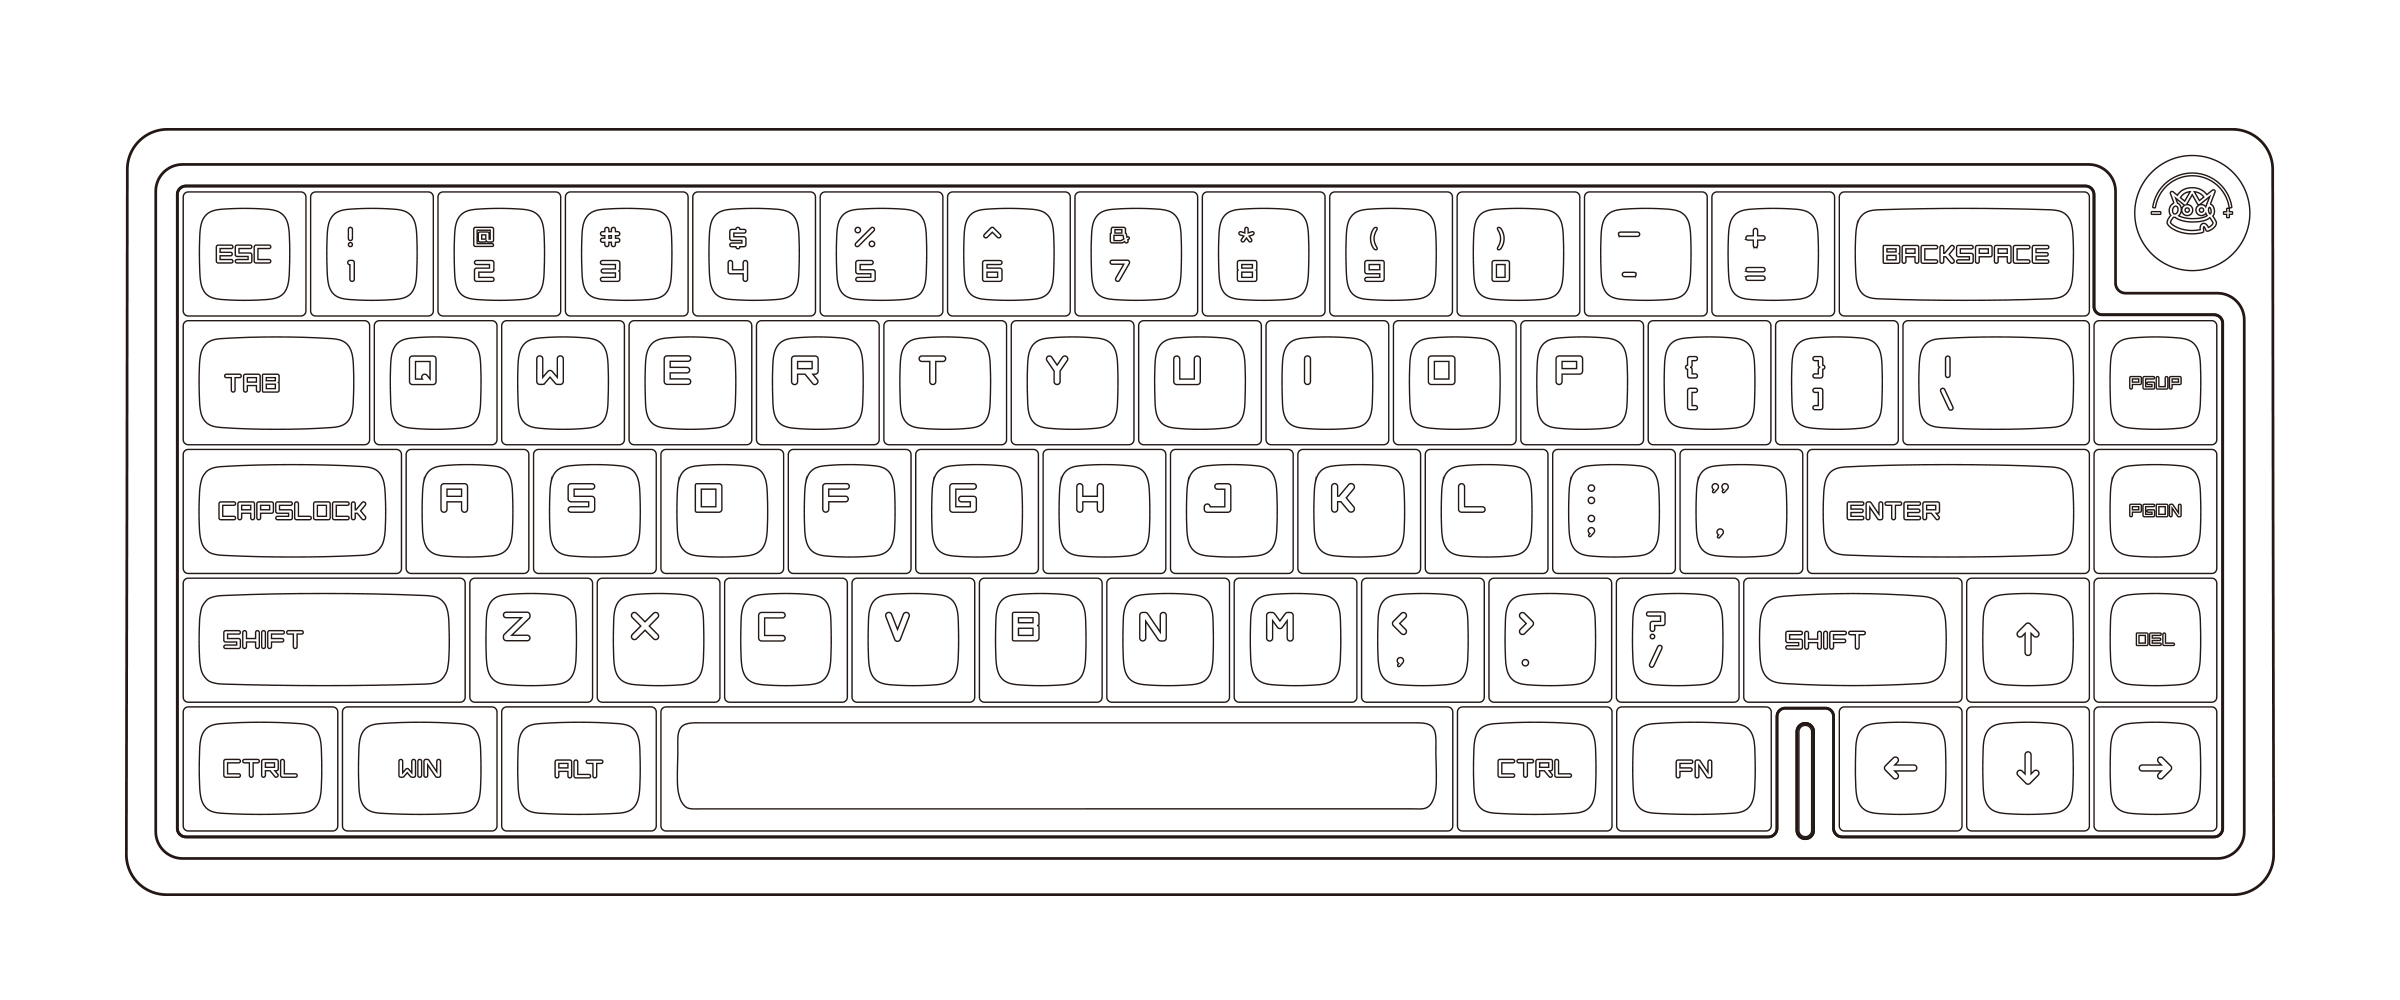 Computer Terminal Monitor Keyboard Drawing Stock Clipart | Royalty-Free |  FreeImages